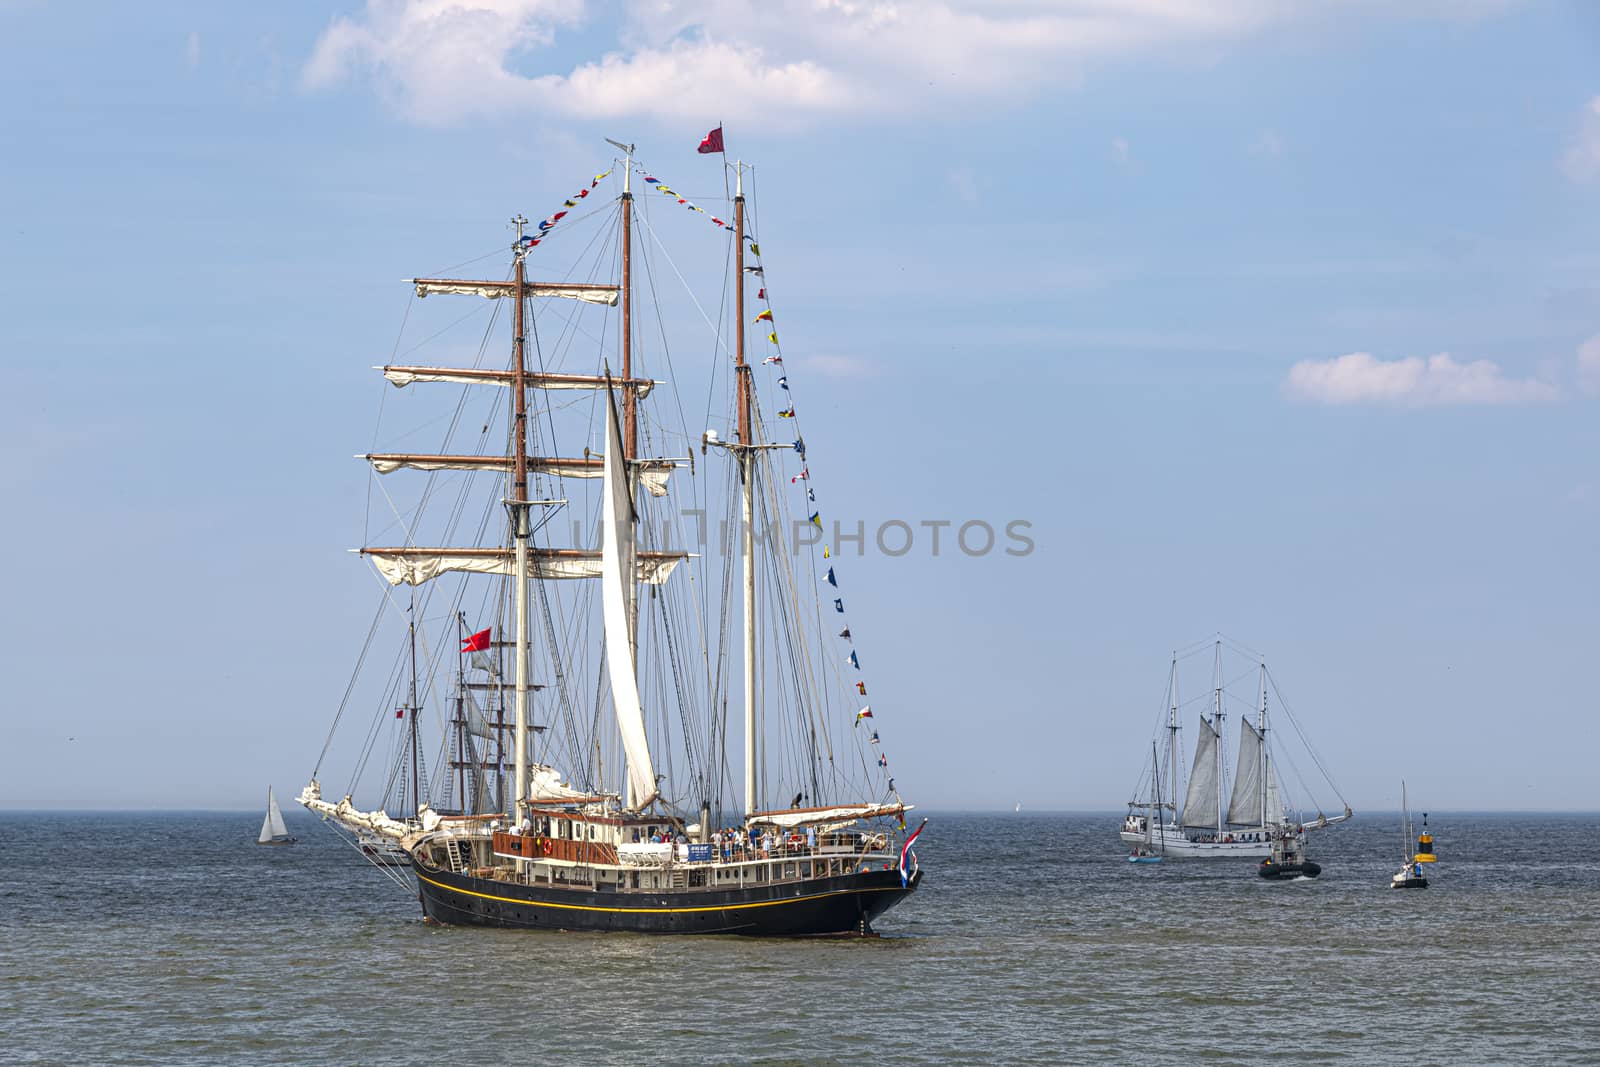 Antique tall ship, vessel leaving the harbor of The Hague, Scheveningen under a sunny and blue sky